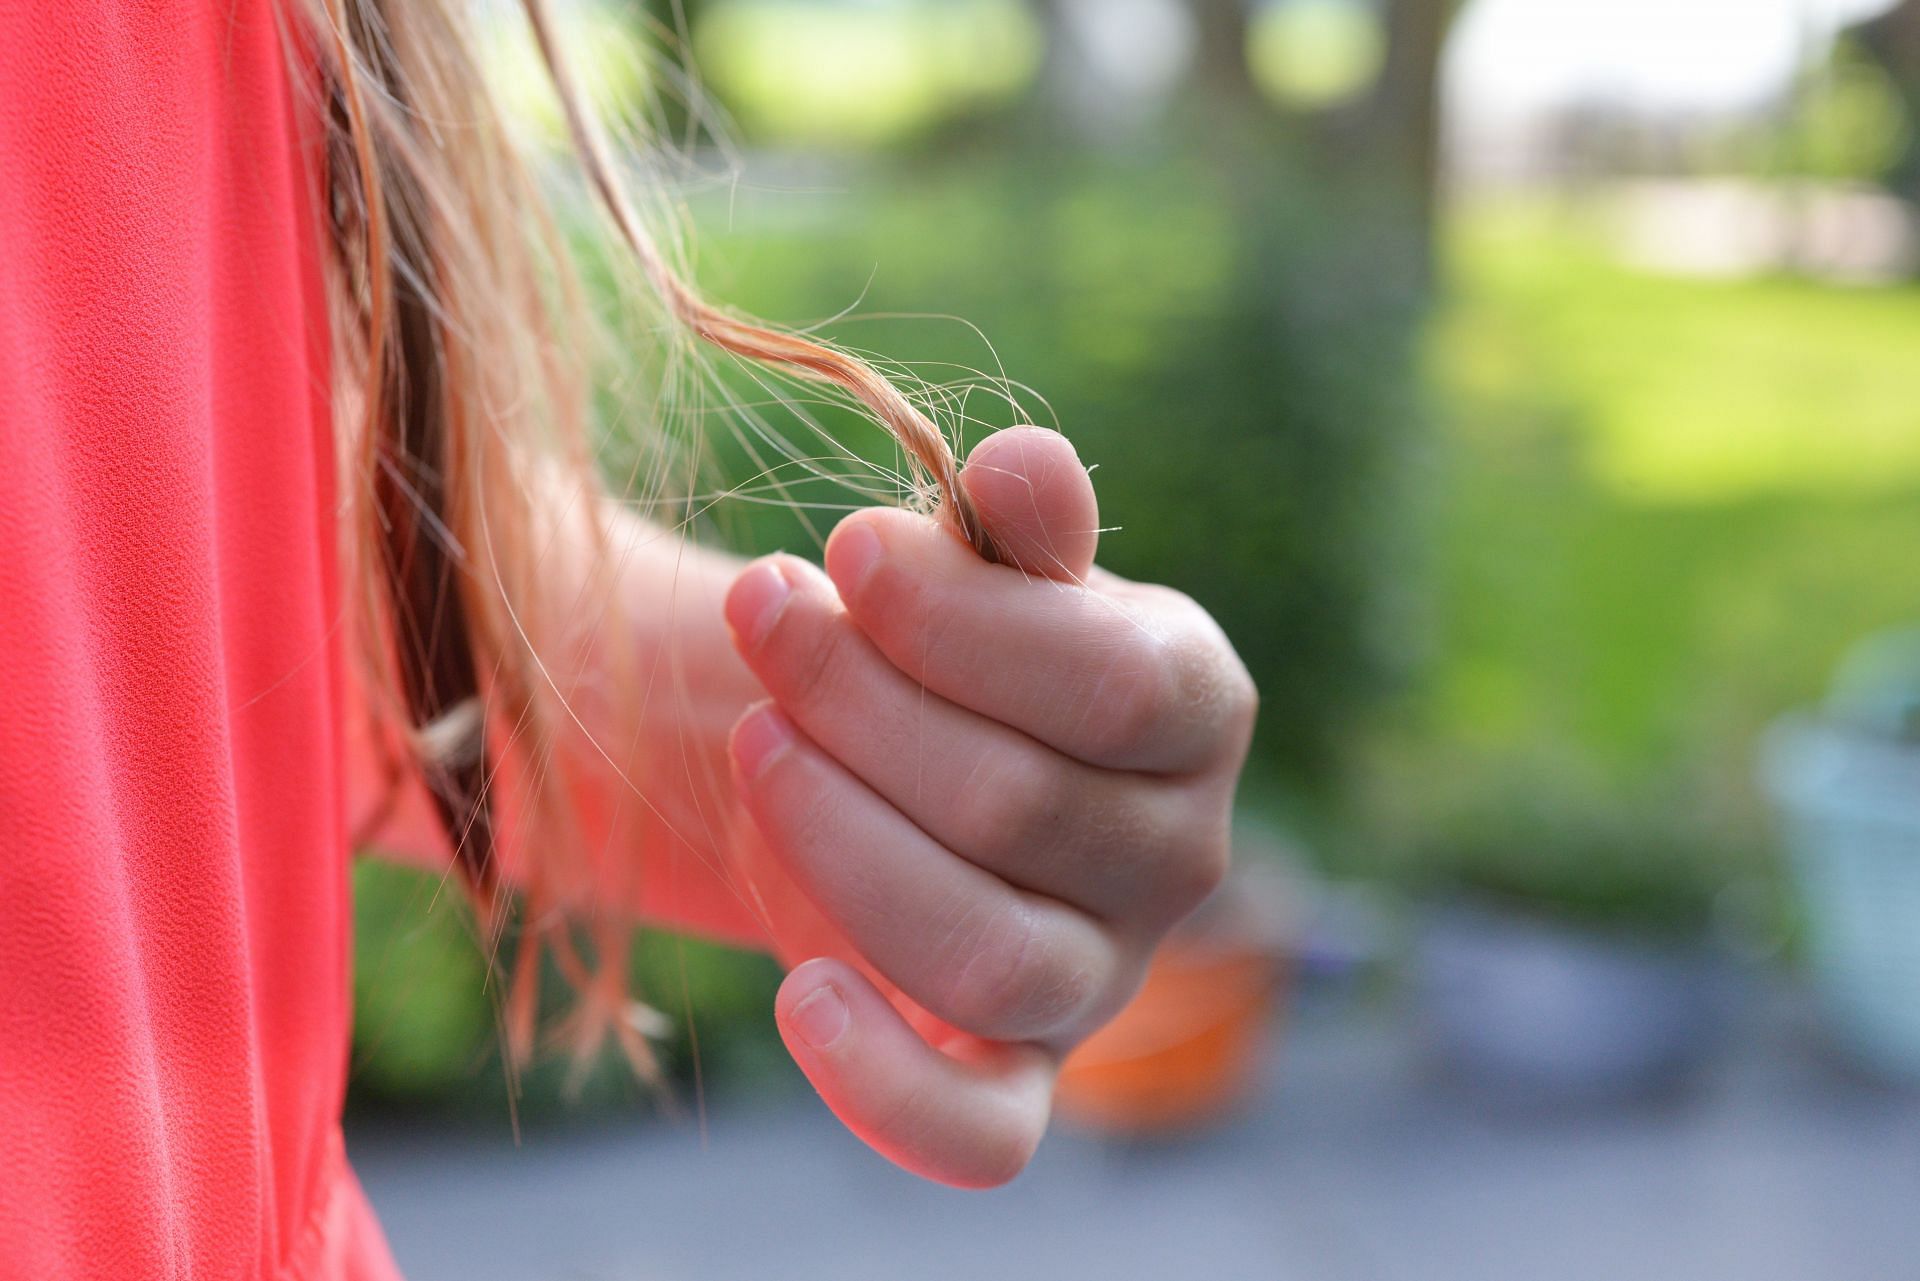 Hair loss is a common sign of nutrient deficiency. (Image via Pexels/ Skitterphoto)